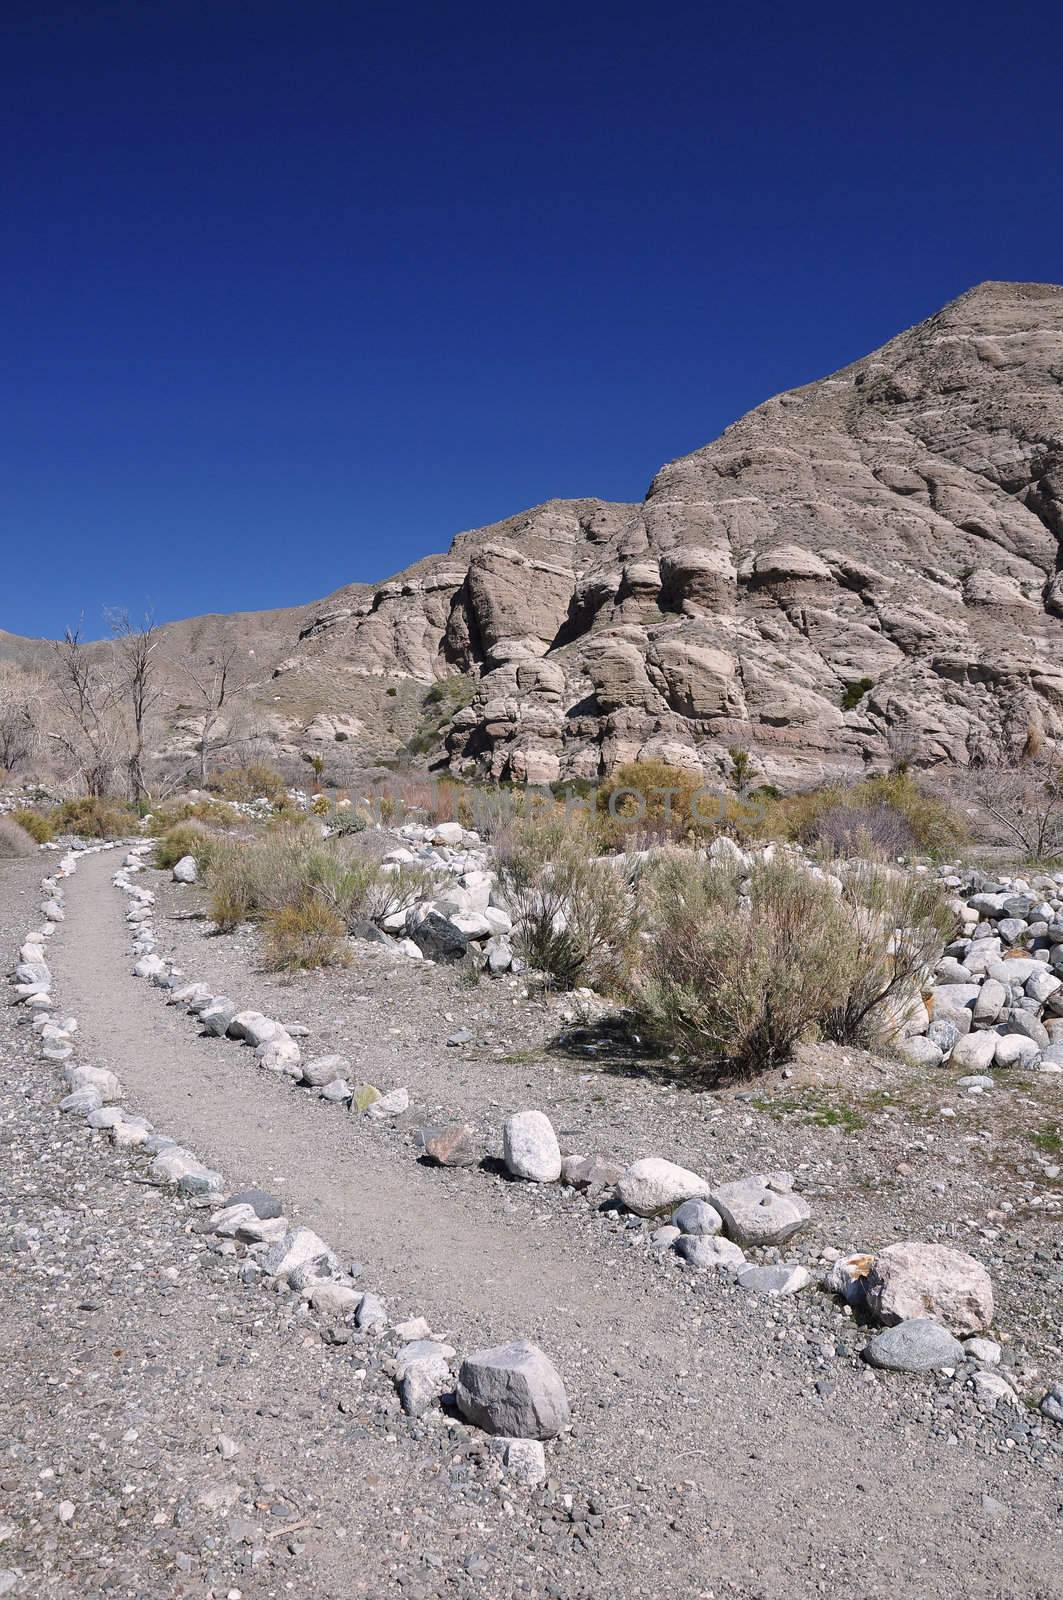 Rocks line a trail through the desert in Whitewater Canyon near the town of Palm Springs, California.